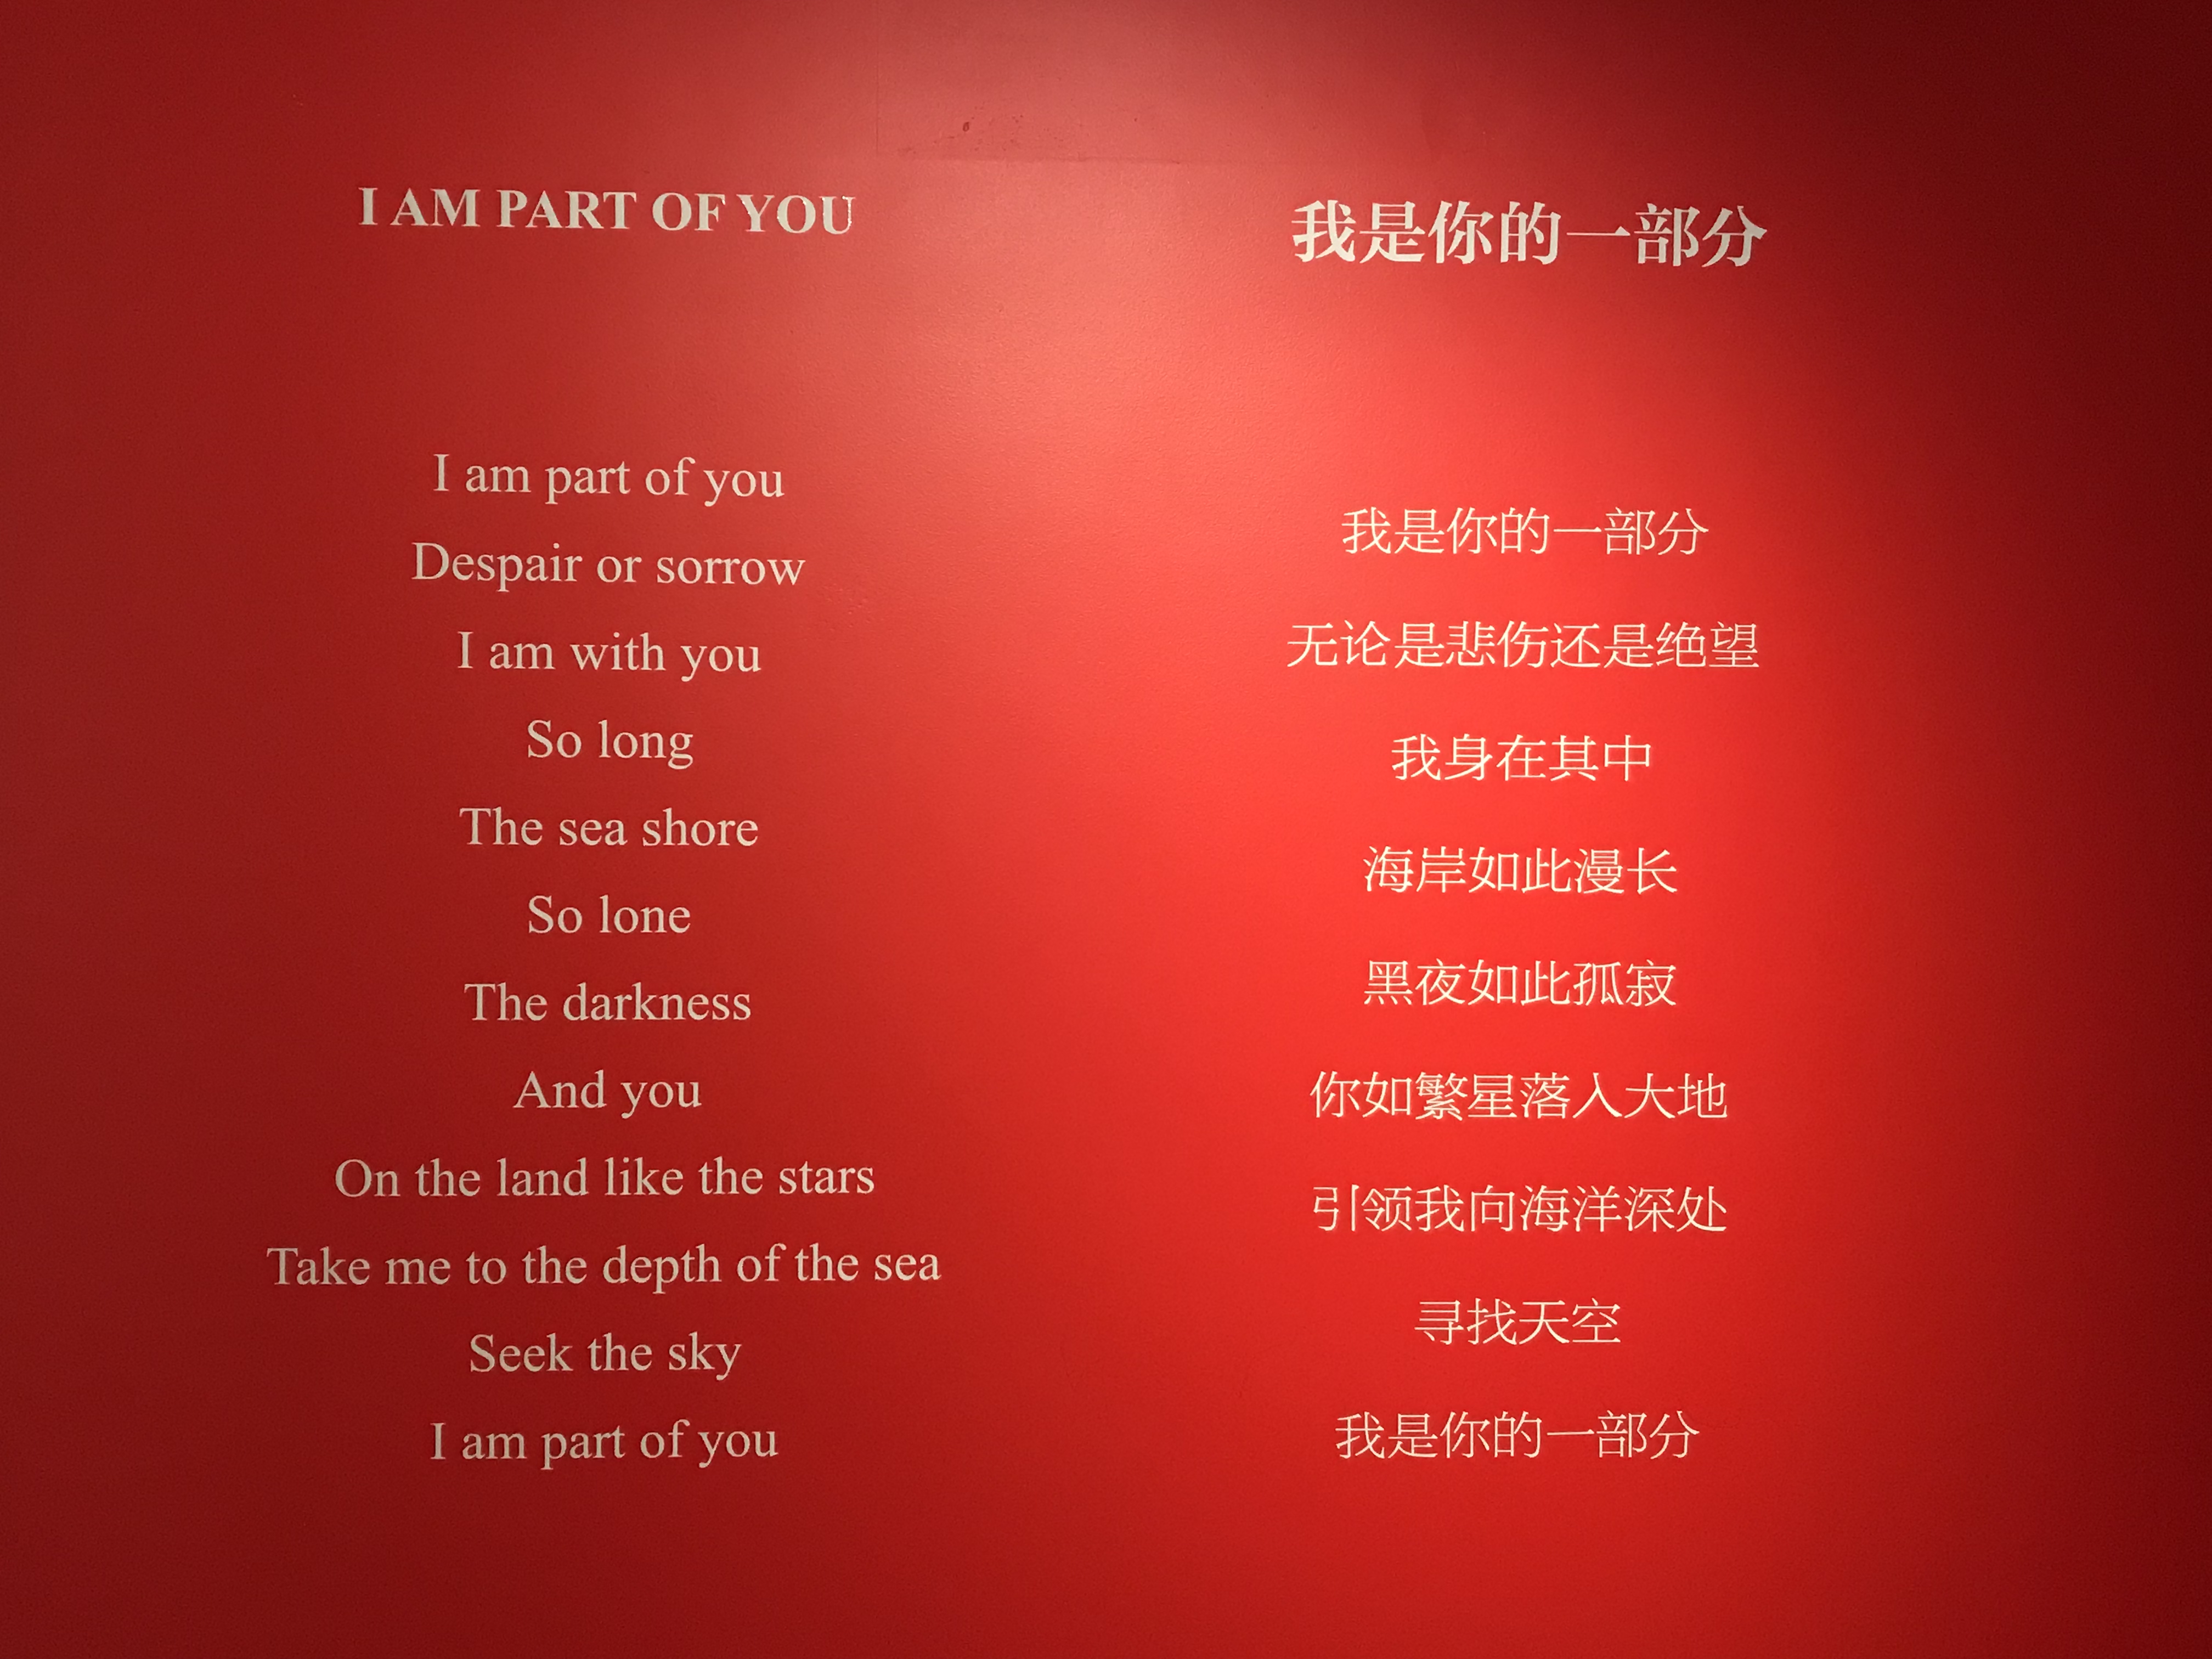 the poetry “I AM PART OF YOU”